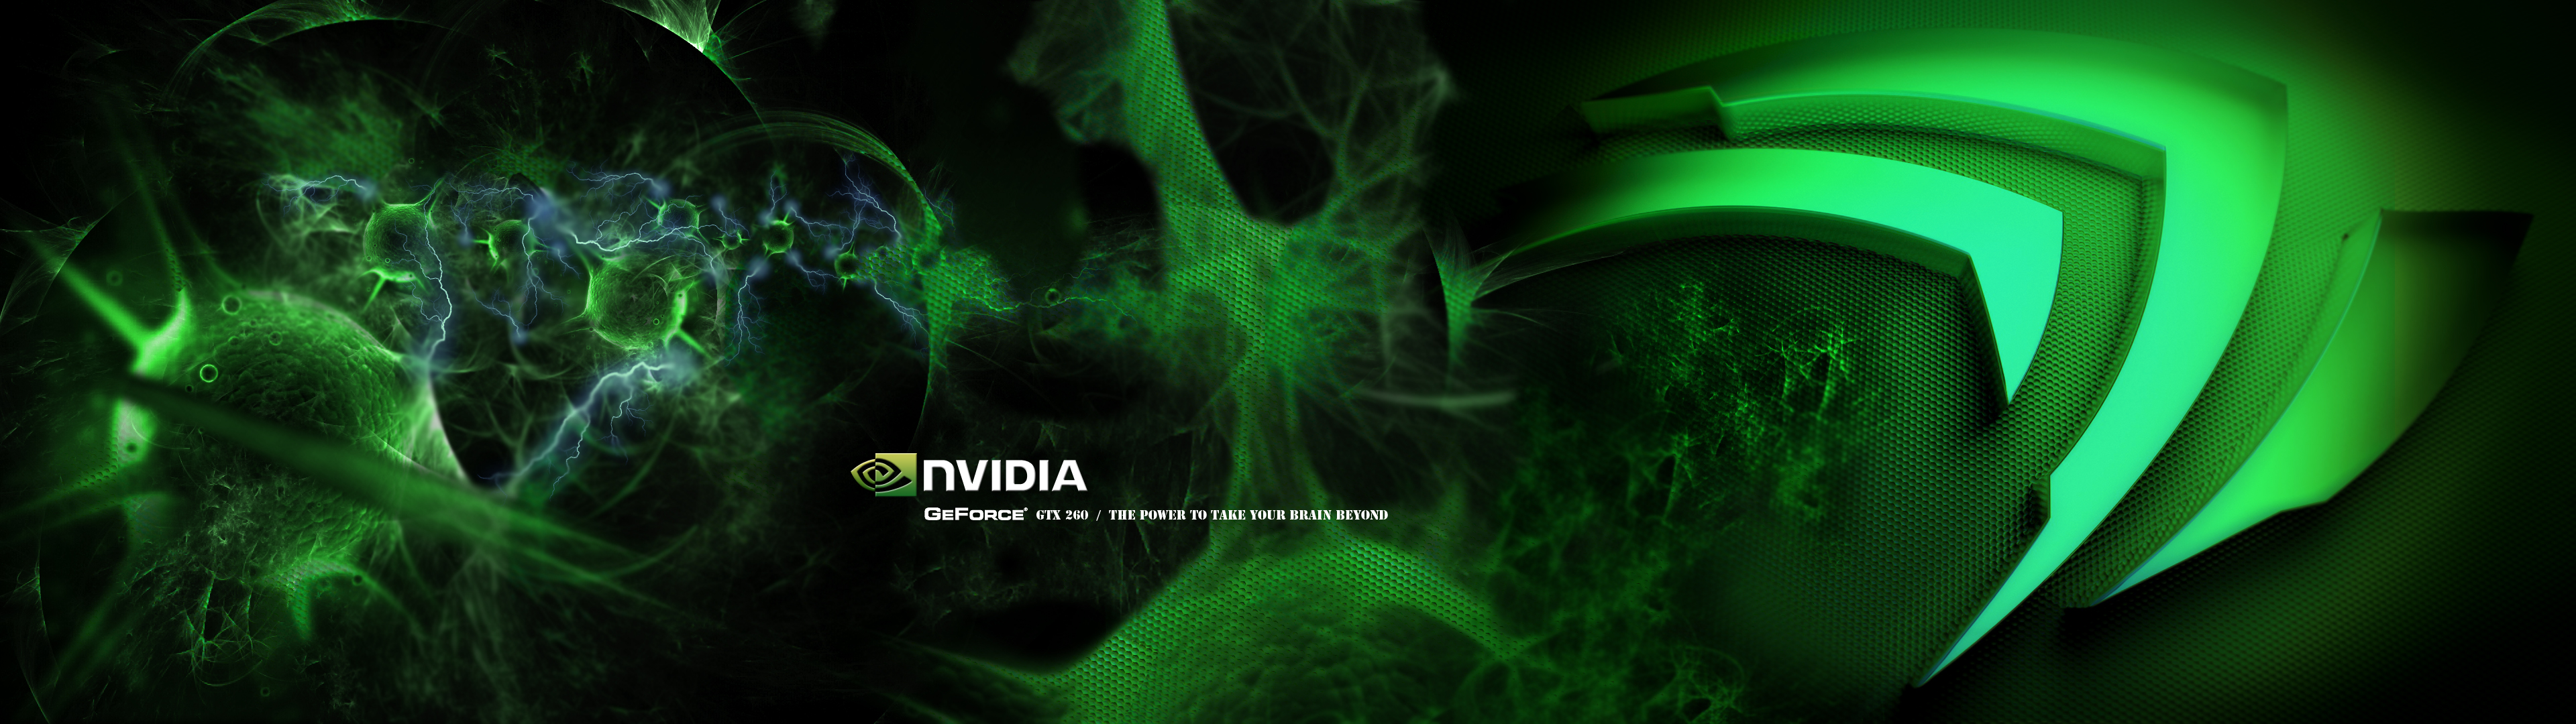 Best Nvidia Monitor Wallpaper Red